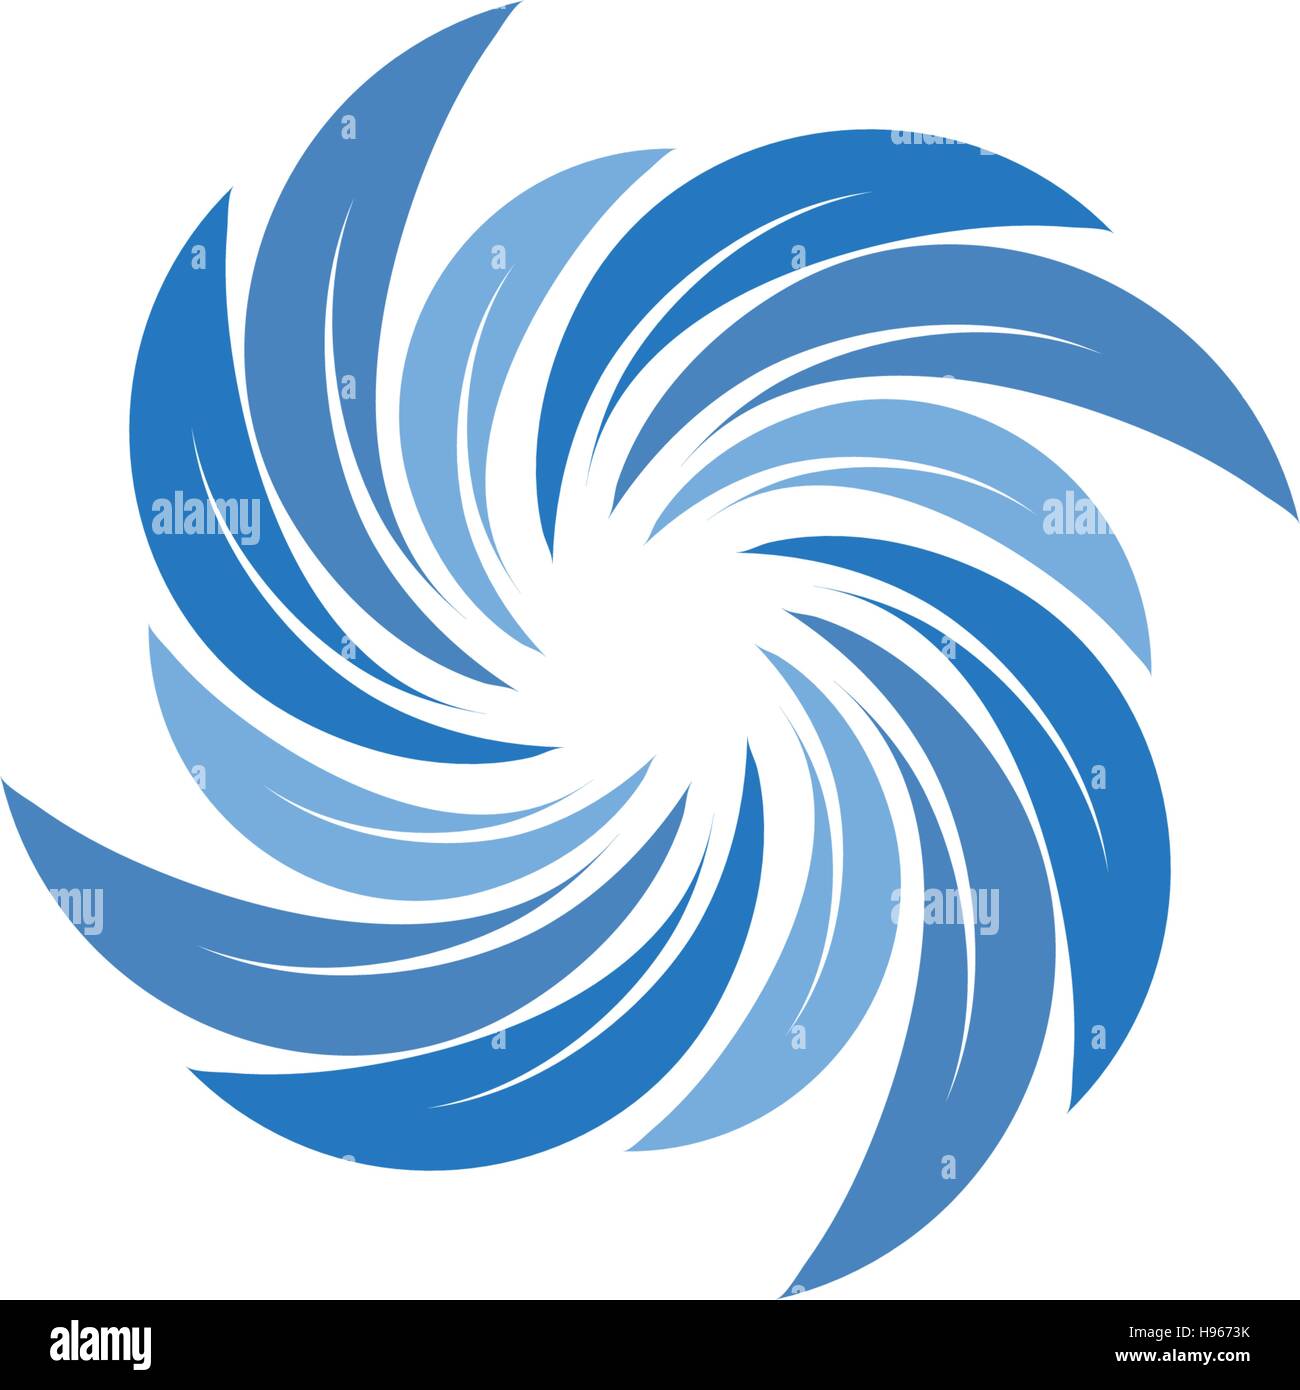 Isolated abstract blue color spining spiral logo. Swirl logotype. Water icon. Vortex sign. Liquid symbol. Conditioning system emblem. Vector aqua illustration. Stock Vector